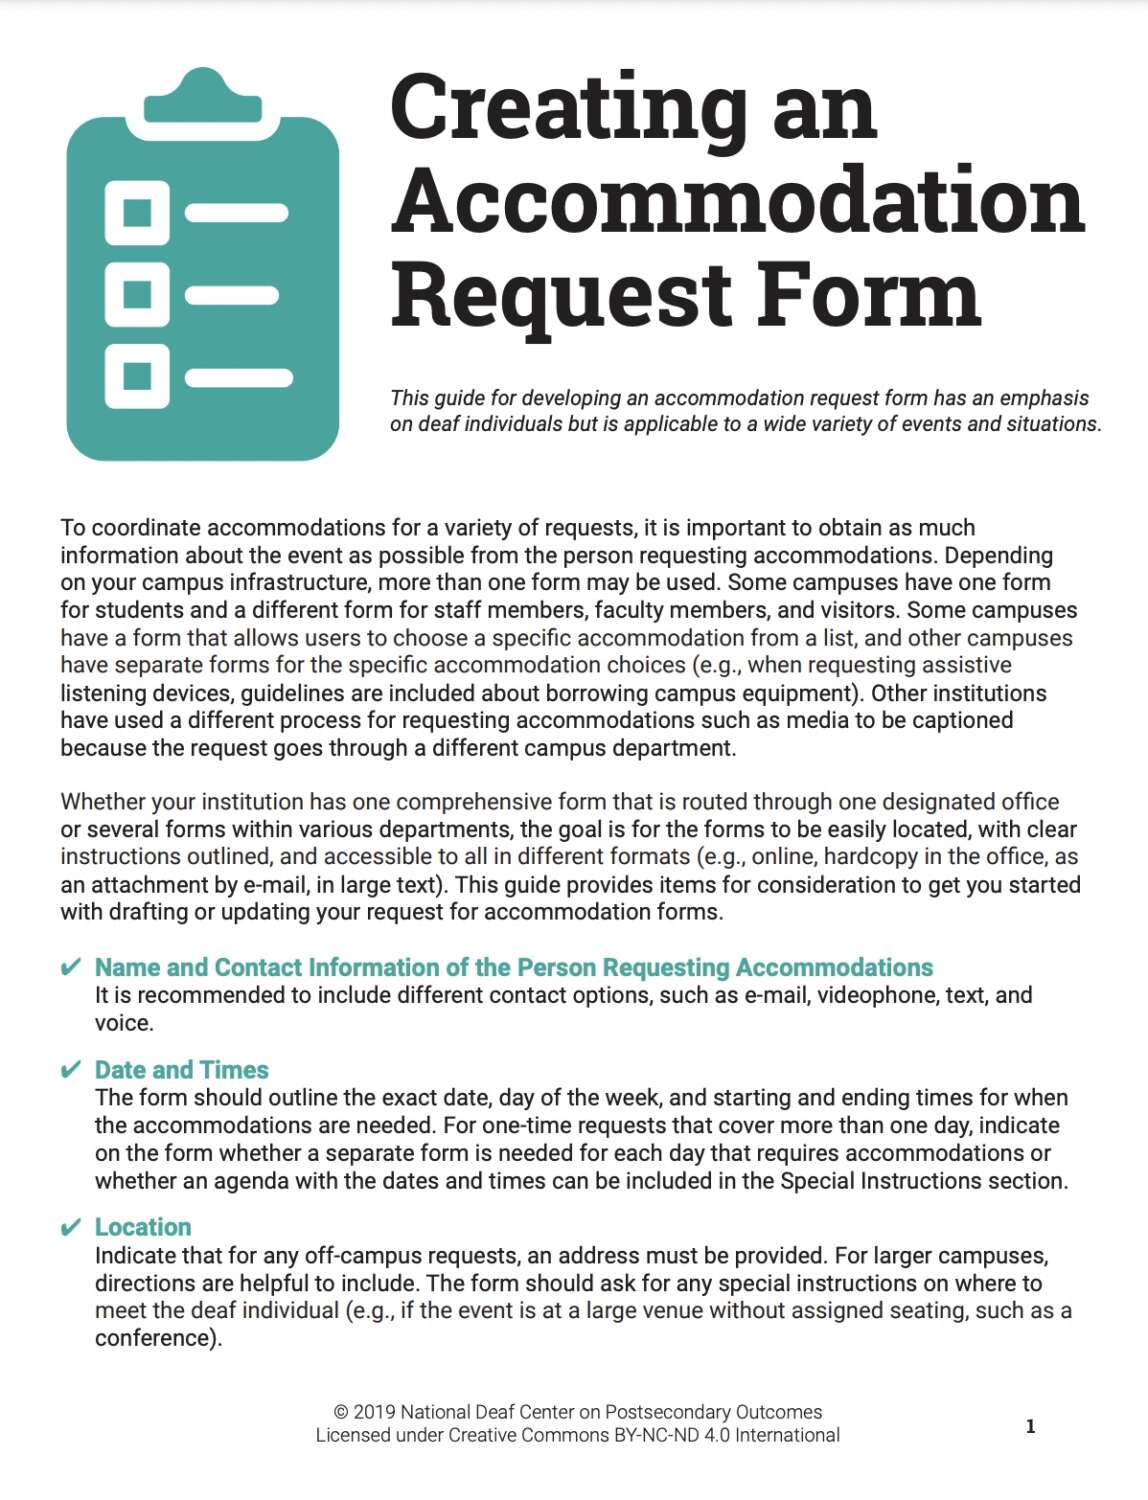 The image is a screenshot of a document providing a guide for creating an accommodation request form with an emphasis on deaf individuals. It includes considerations for obtaining information about the event, coordinating accommodations, and providing clear instructions. The guide outlines the information to include such as name and contact information, date and times, and location for the accommodations.